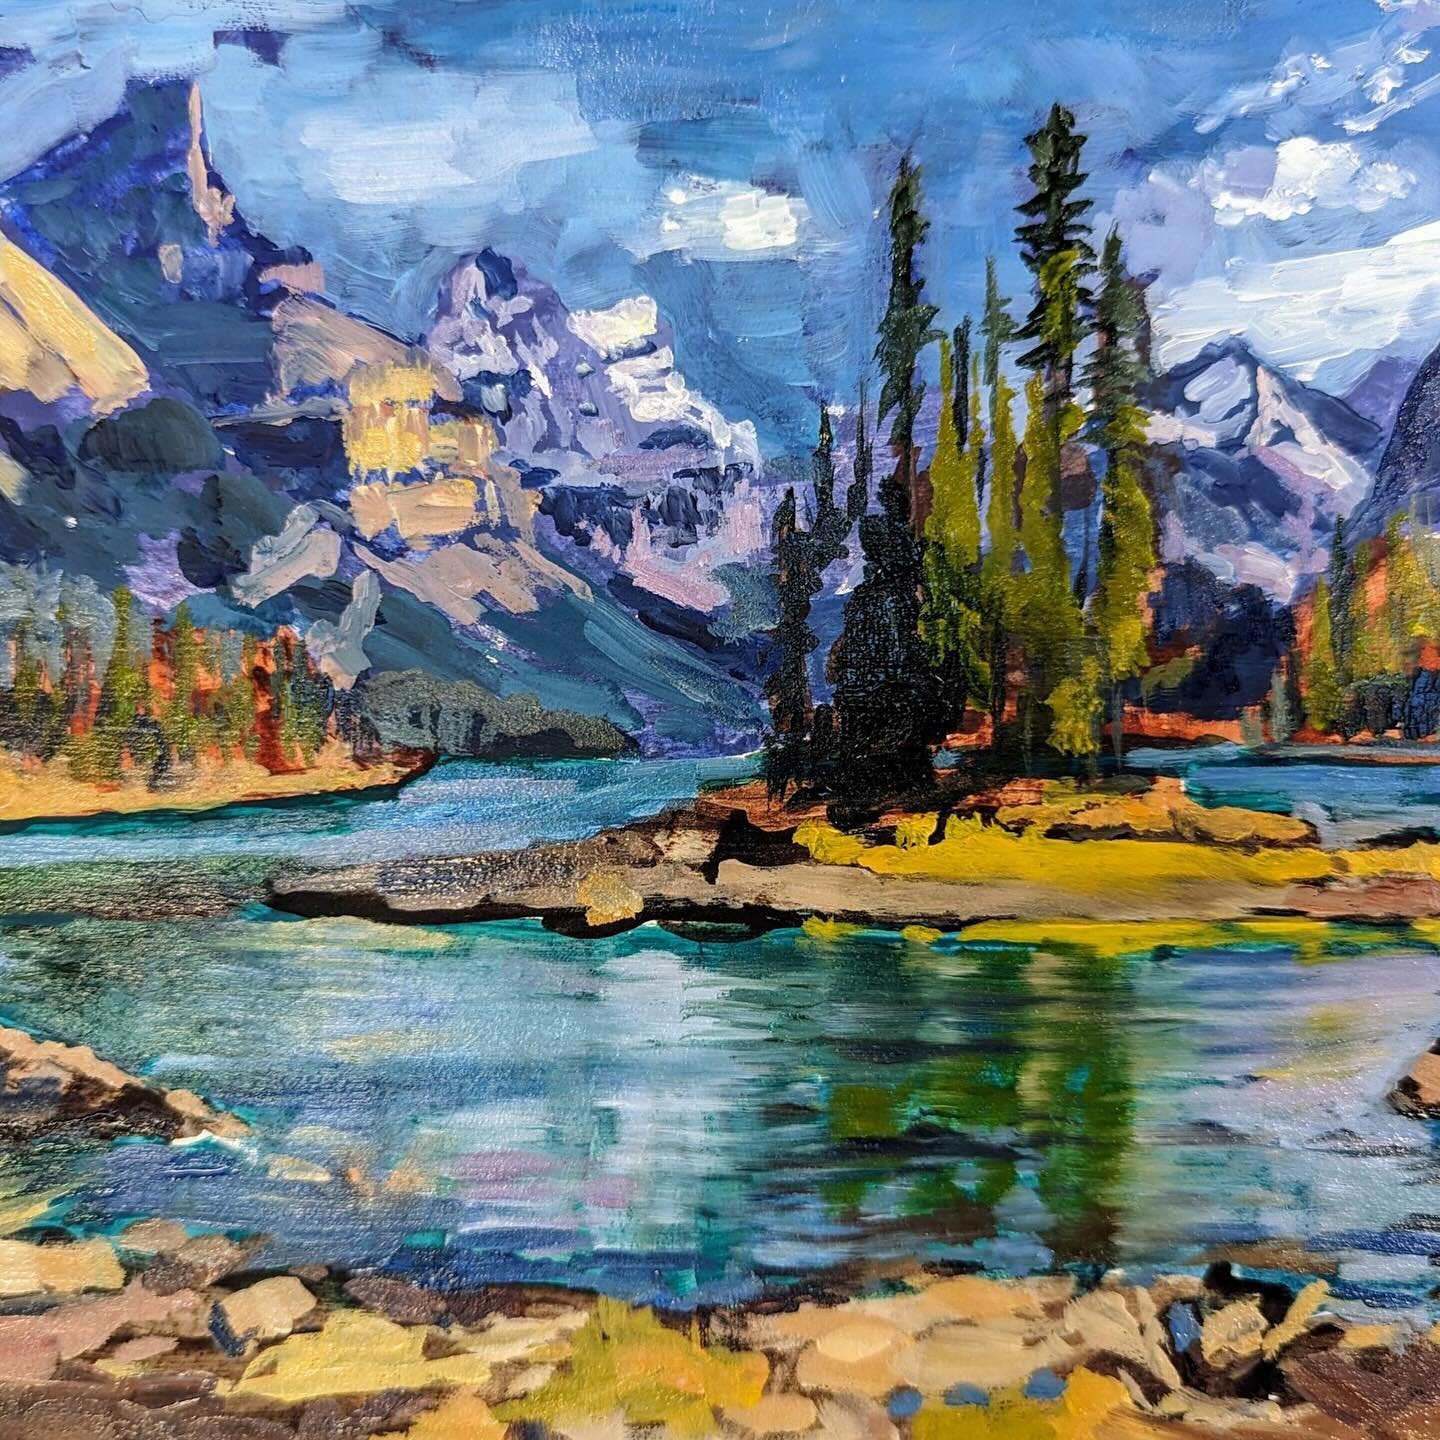 REGISTER FOR ADULT ART CLASSES with May start dates! 🎨 ✍️ 🖼️ 

The Allied Arts Council of Spruce Grove is excited to announce new Adult Art Classes offered at the Spruce Grove Art Gallery or online with May start dates.

Click the link in our bio t